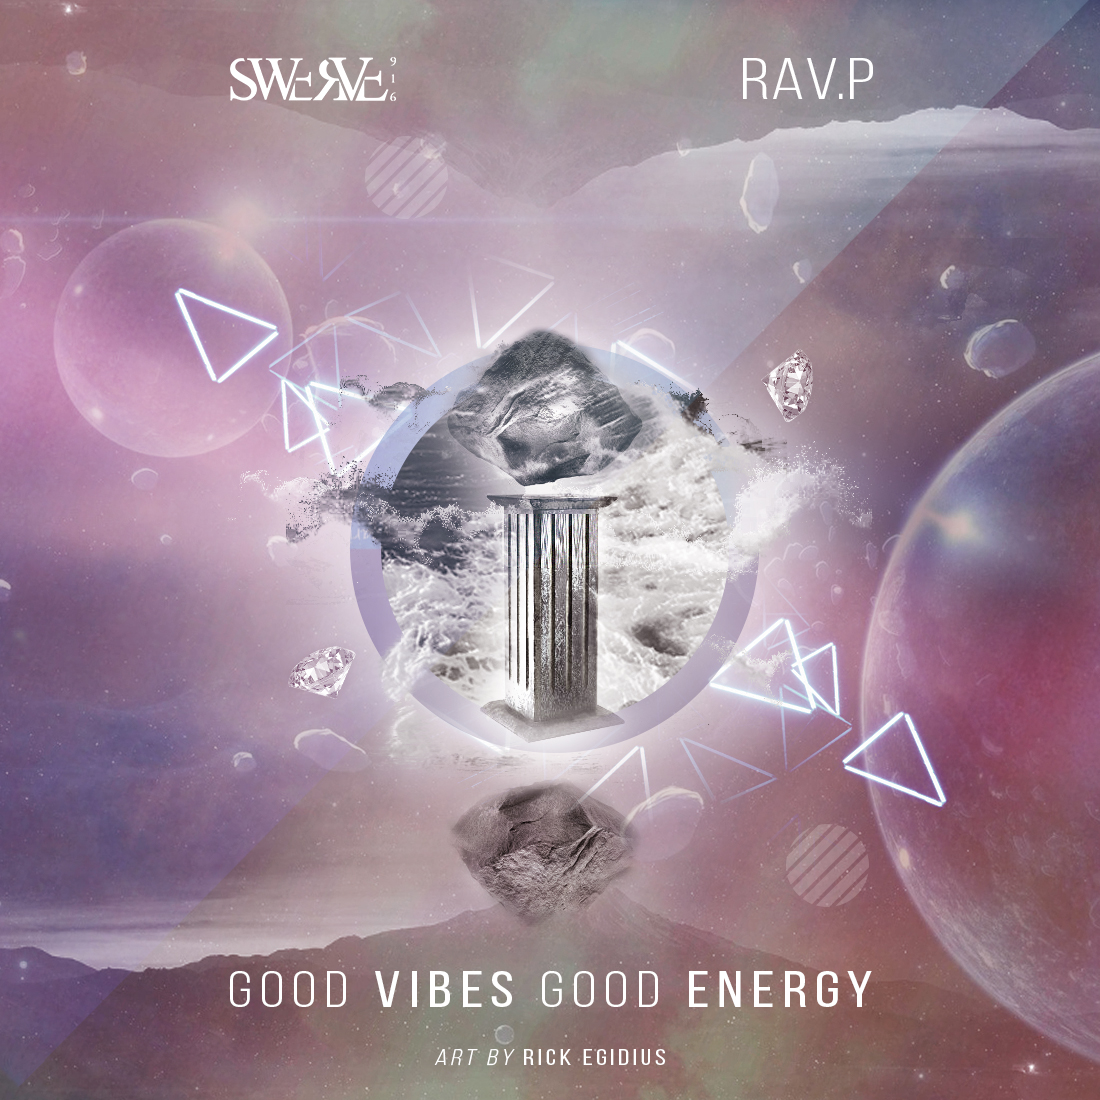 Swerve 916 x Rav.P Drop The Title Track For ‘Good Vibes Good Energy’ EP